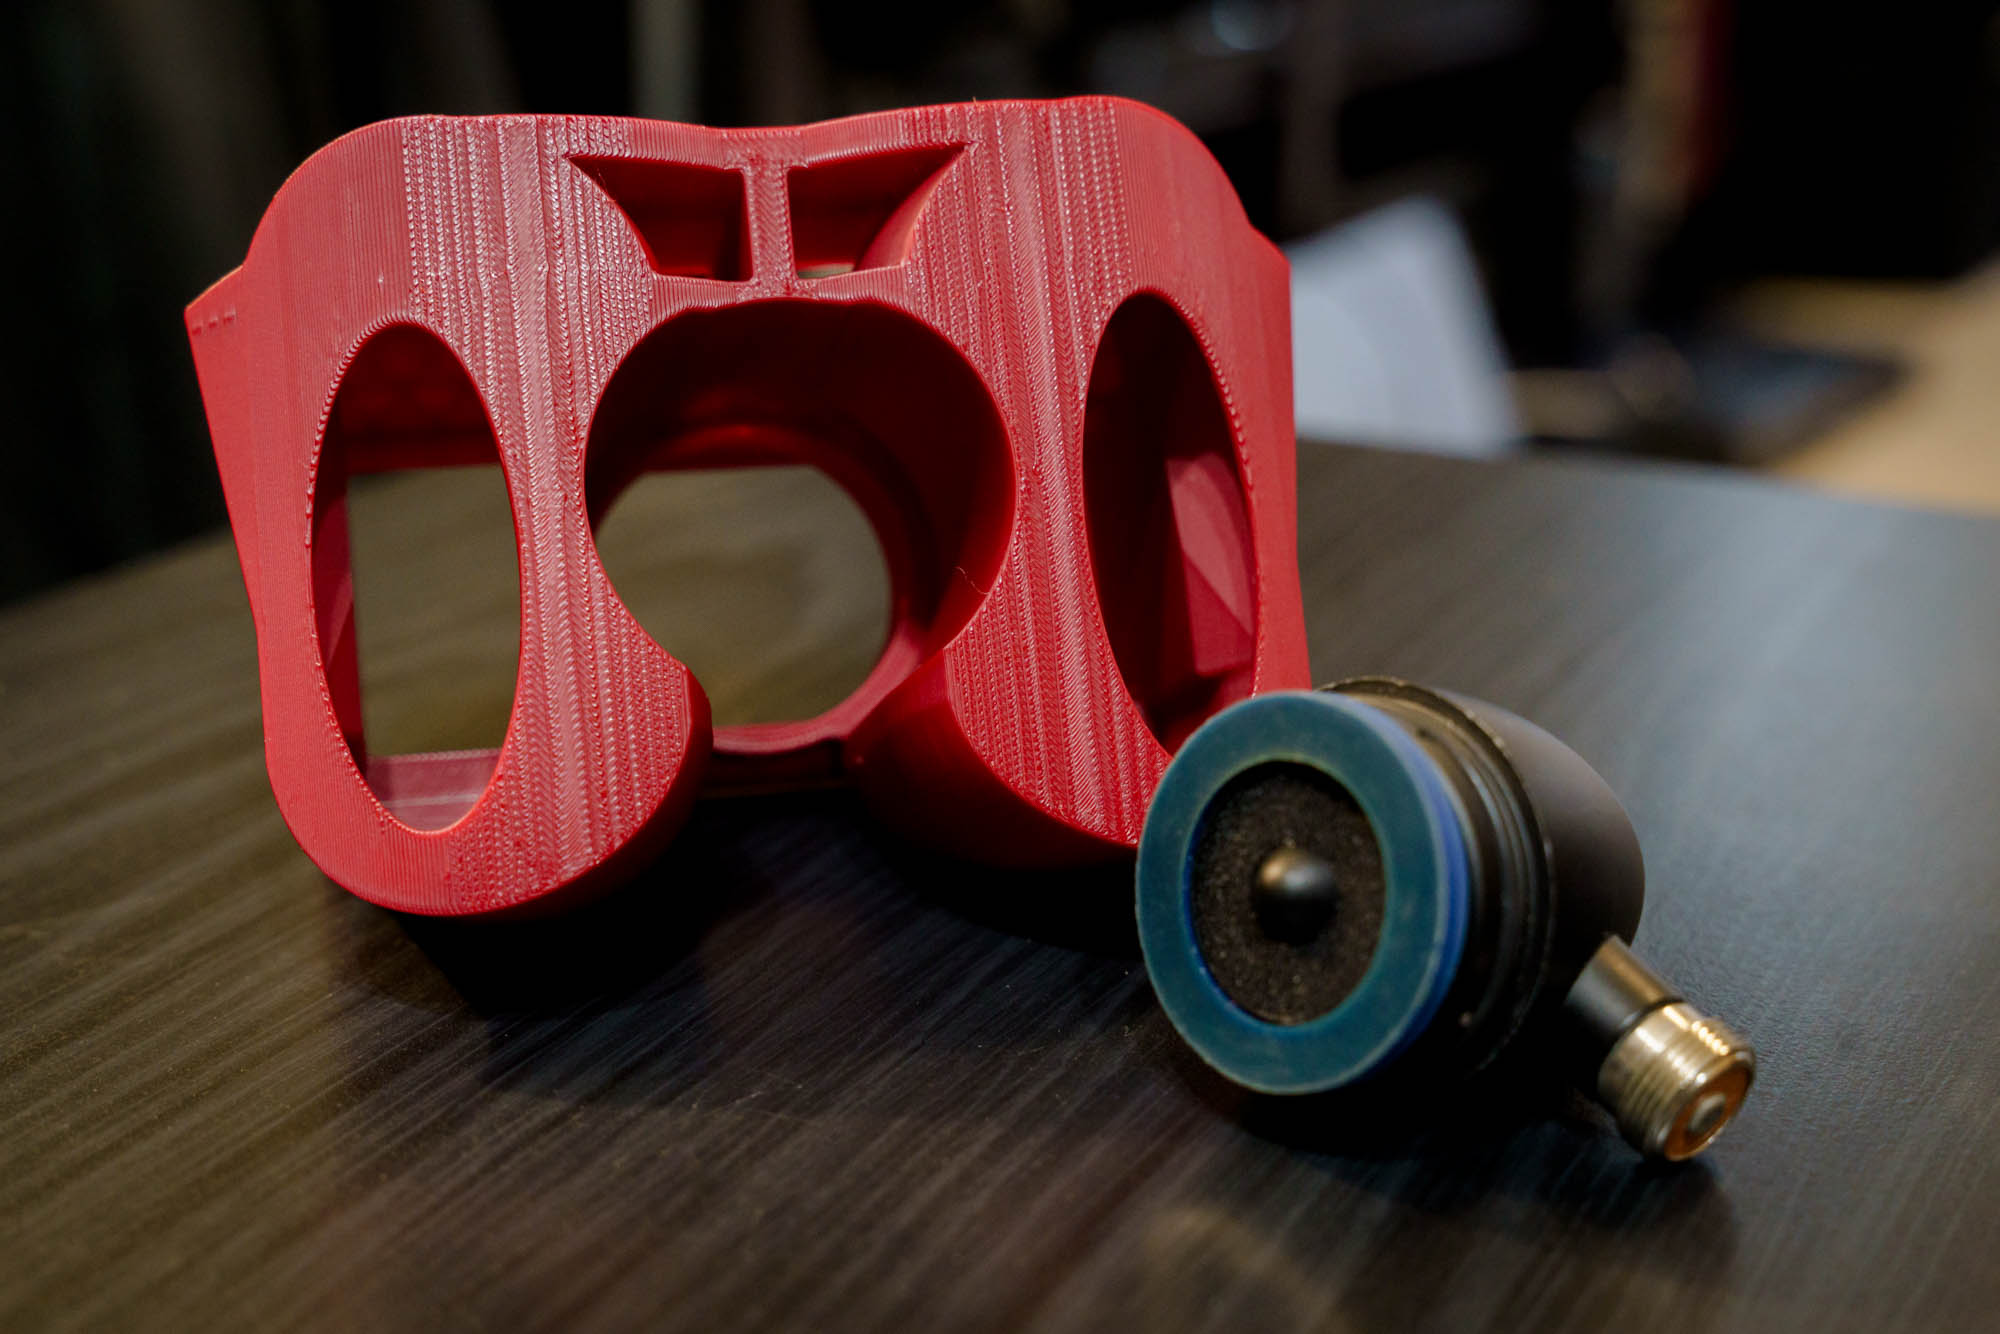 A 3d-printed harmonica adapter